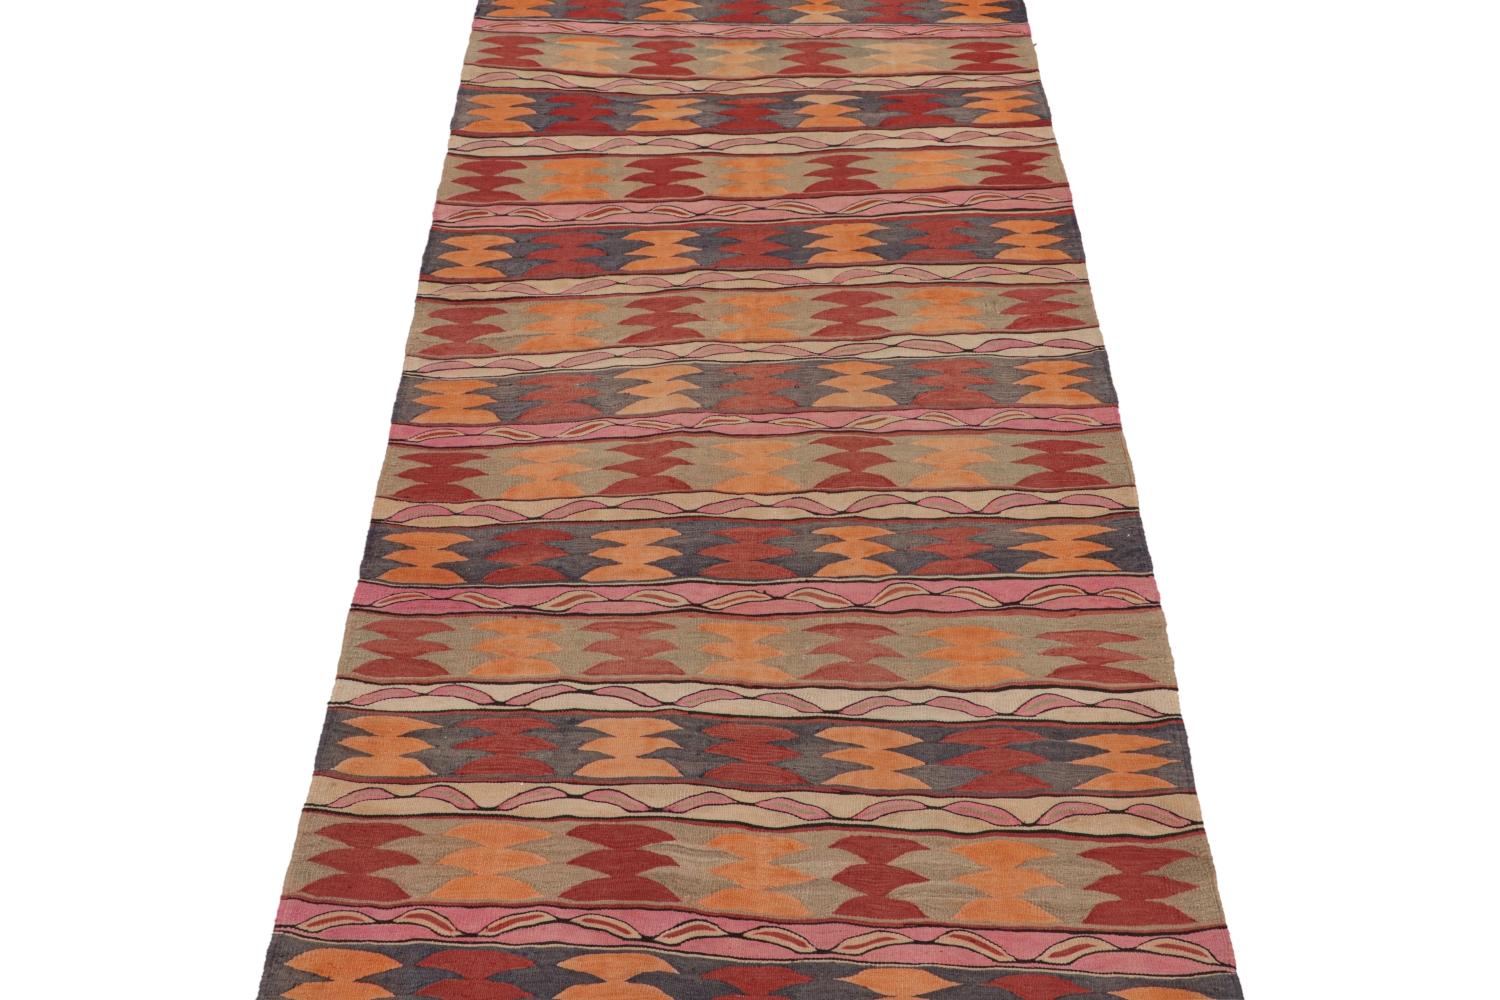 Vintage Karadagh Persian Kilim in Red, Orange & Beige Patterns In Good Condition For Sale In Long Island City, NY